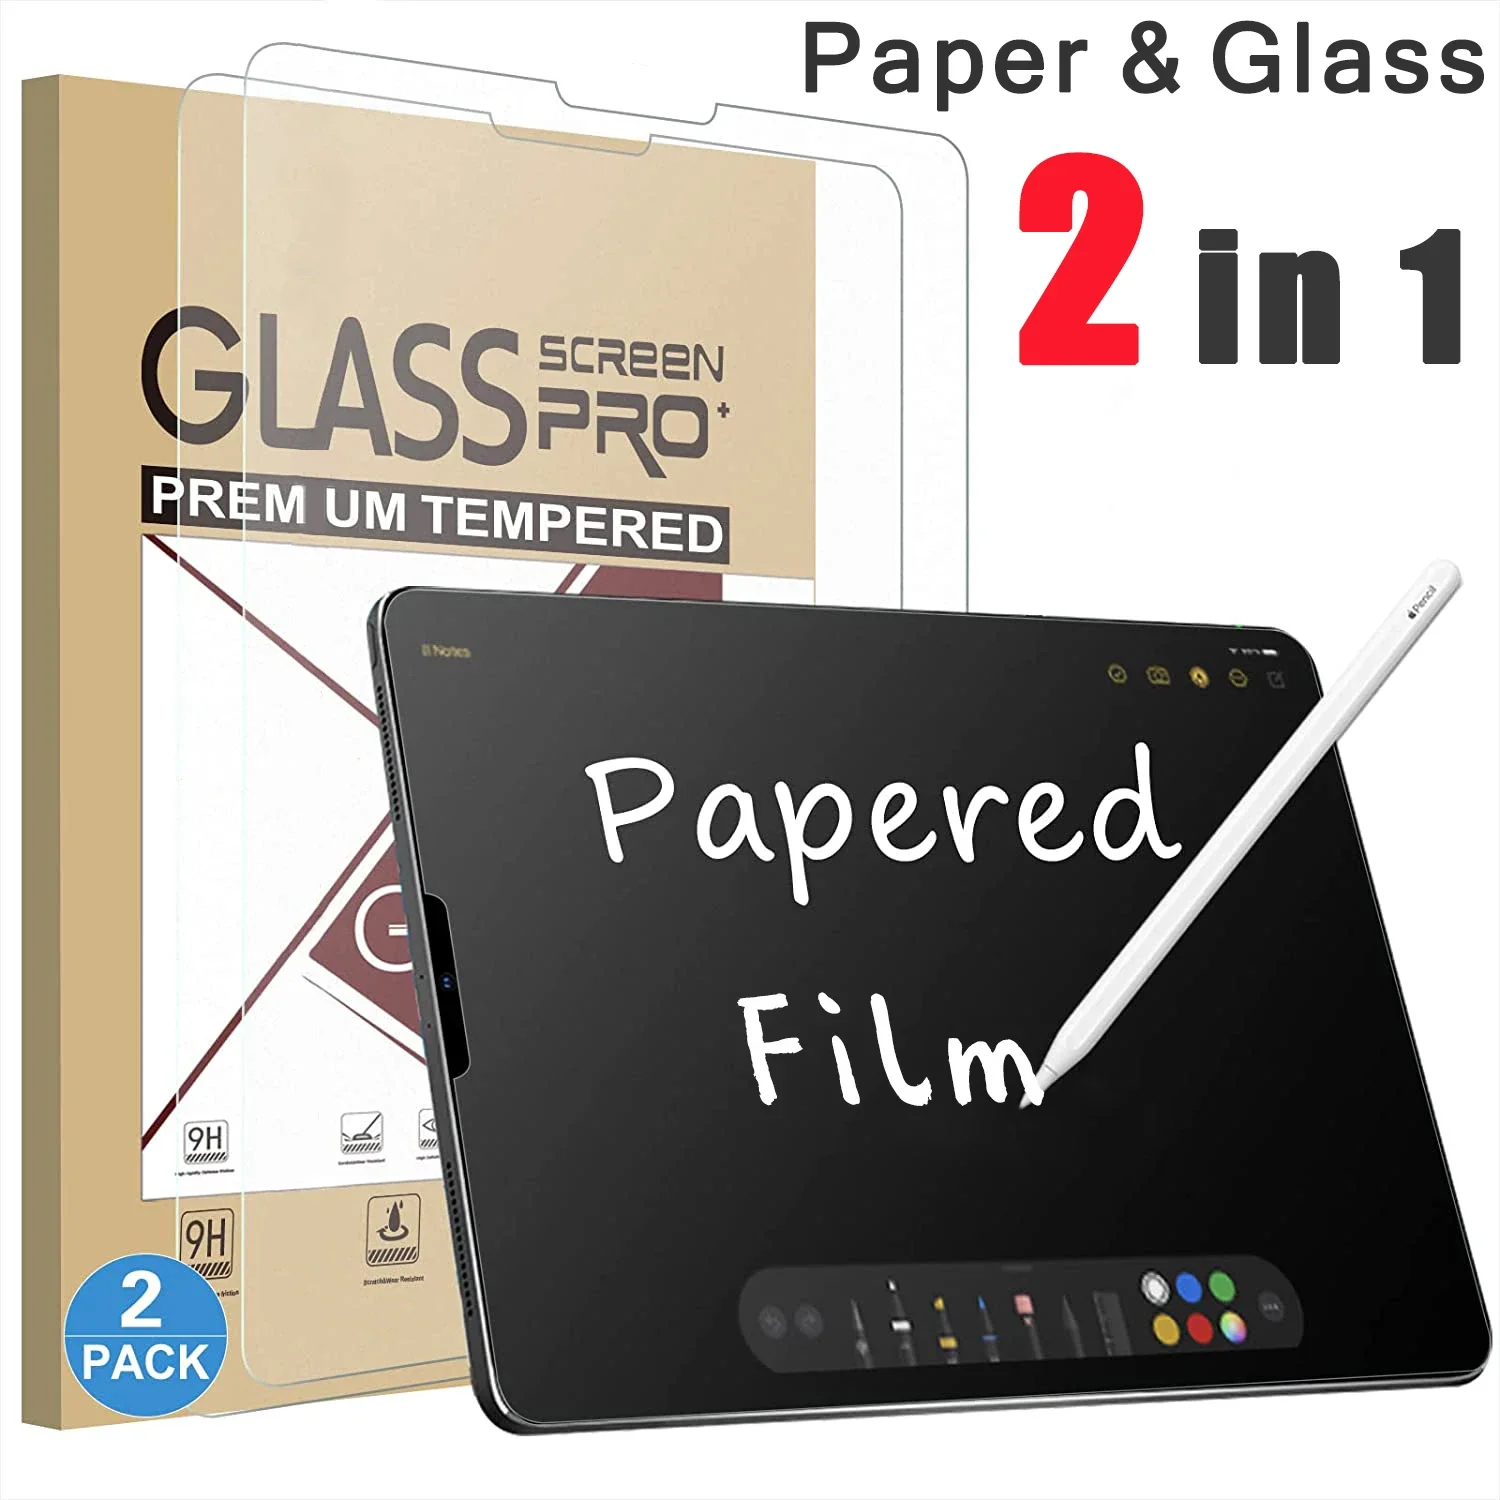 

Screen Protector For iPad 5 6 7th 8th 9th 10th Gen 10.9 10.2 9.7 Like Paper Film Pro 11 12.9 Mini 6 Air 2 3 4 5 Tempered Glass